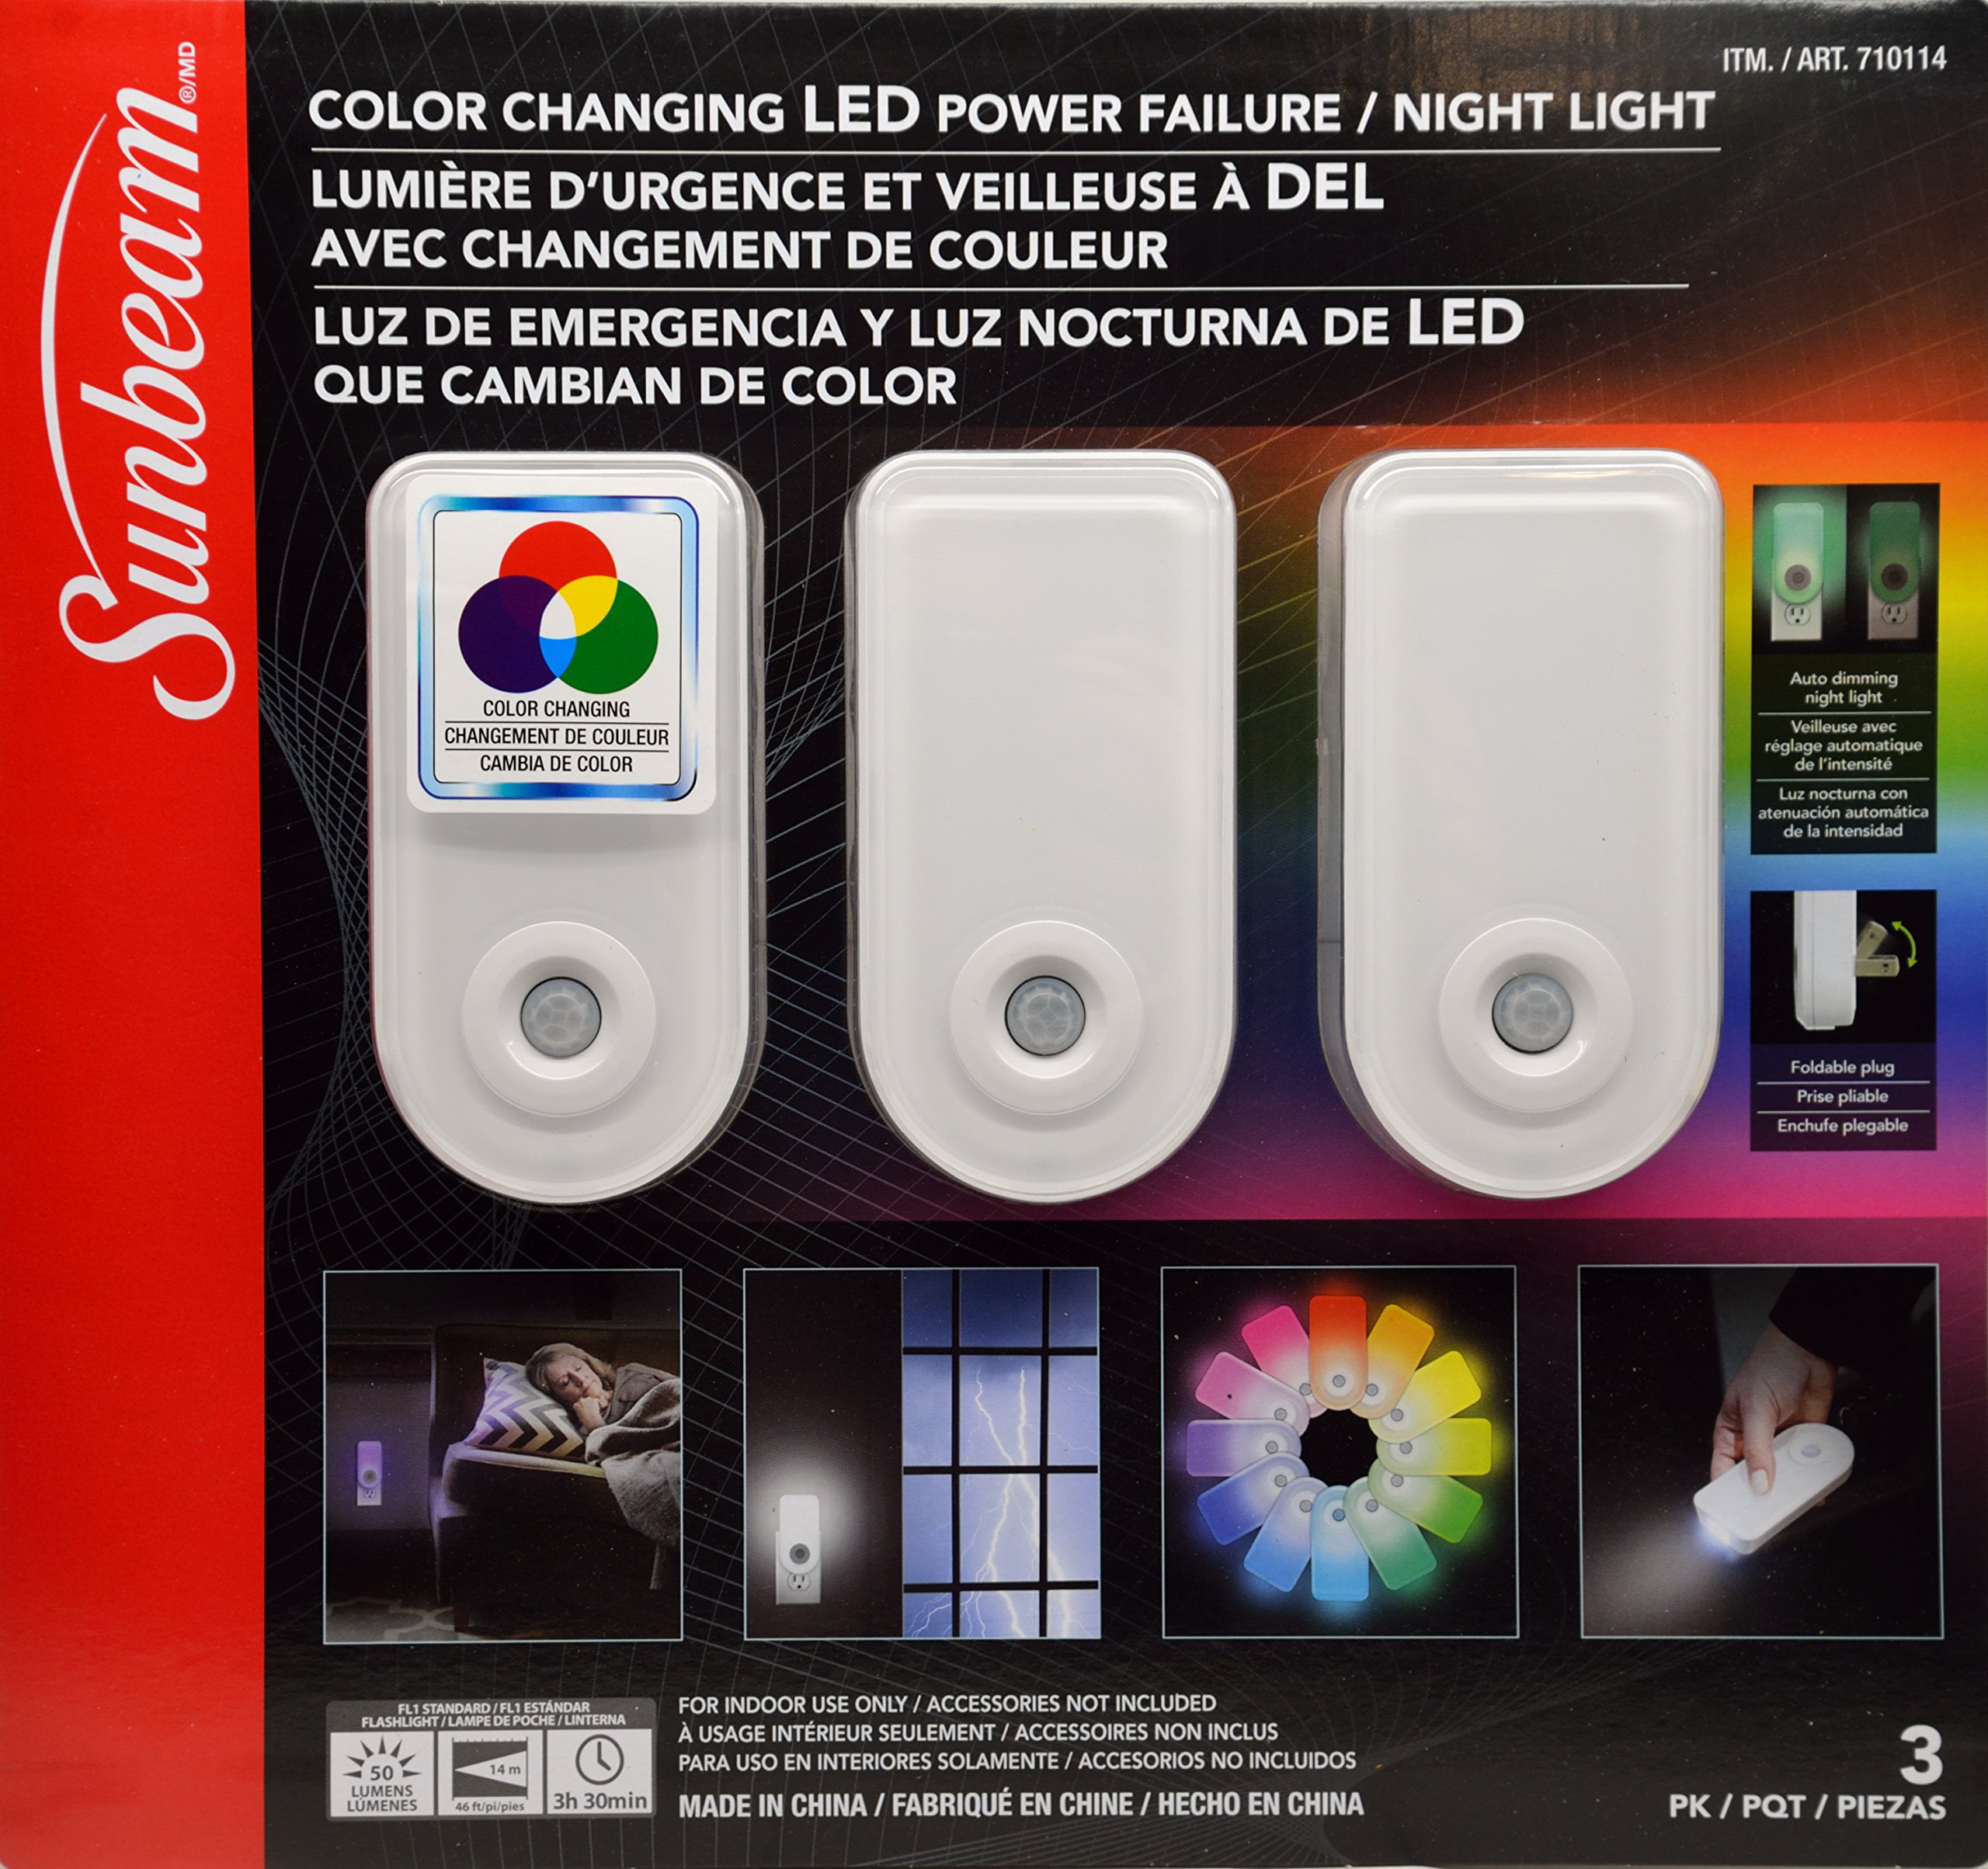 Sunbeam Color Changing LED Power Failure Night Light 3 Pack w/Flashlight & more